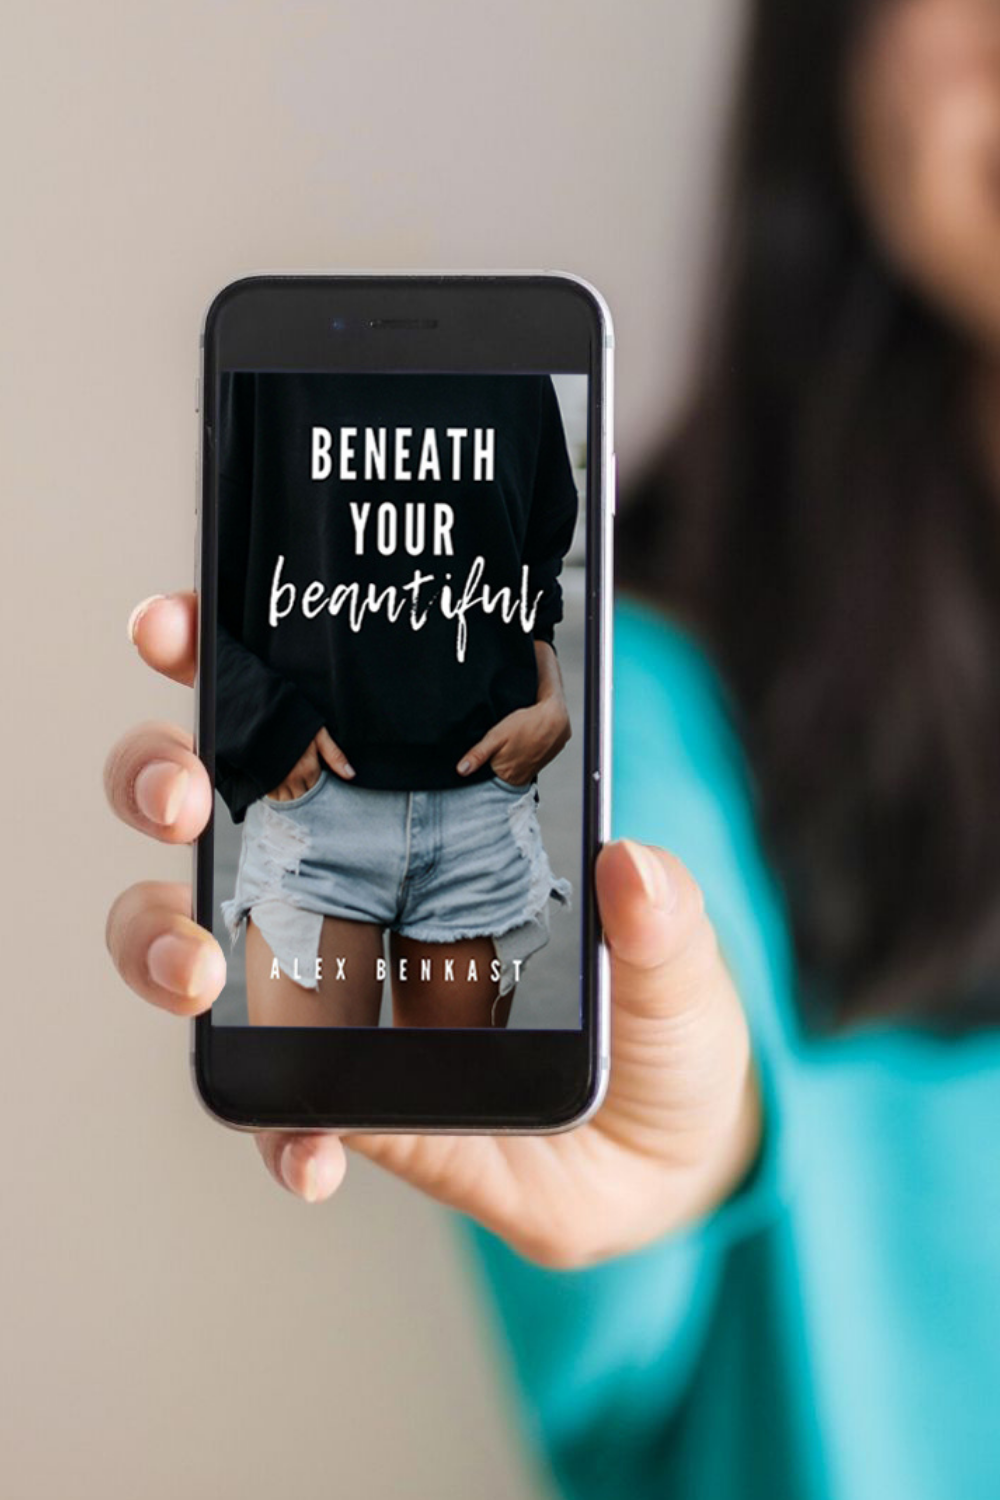 Beneath Your Beautiful by Alex Benkast Promo Pins